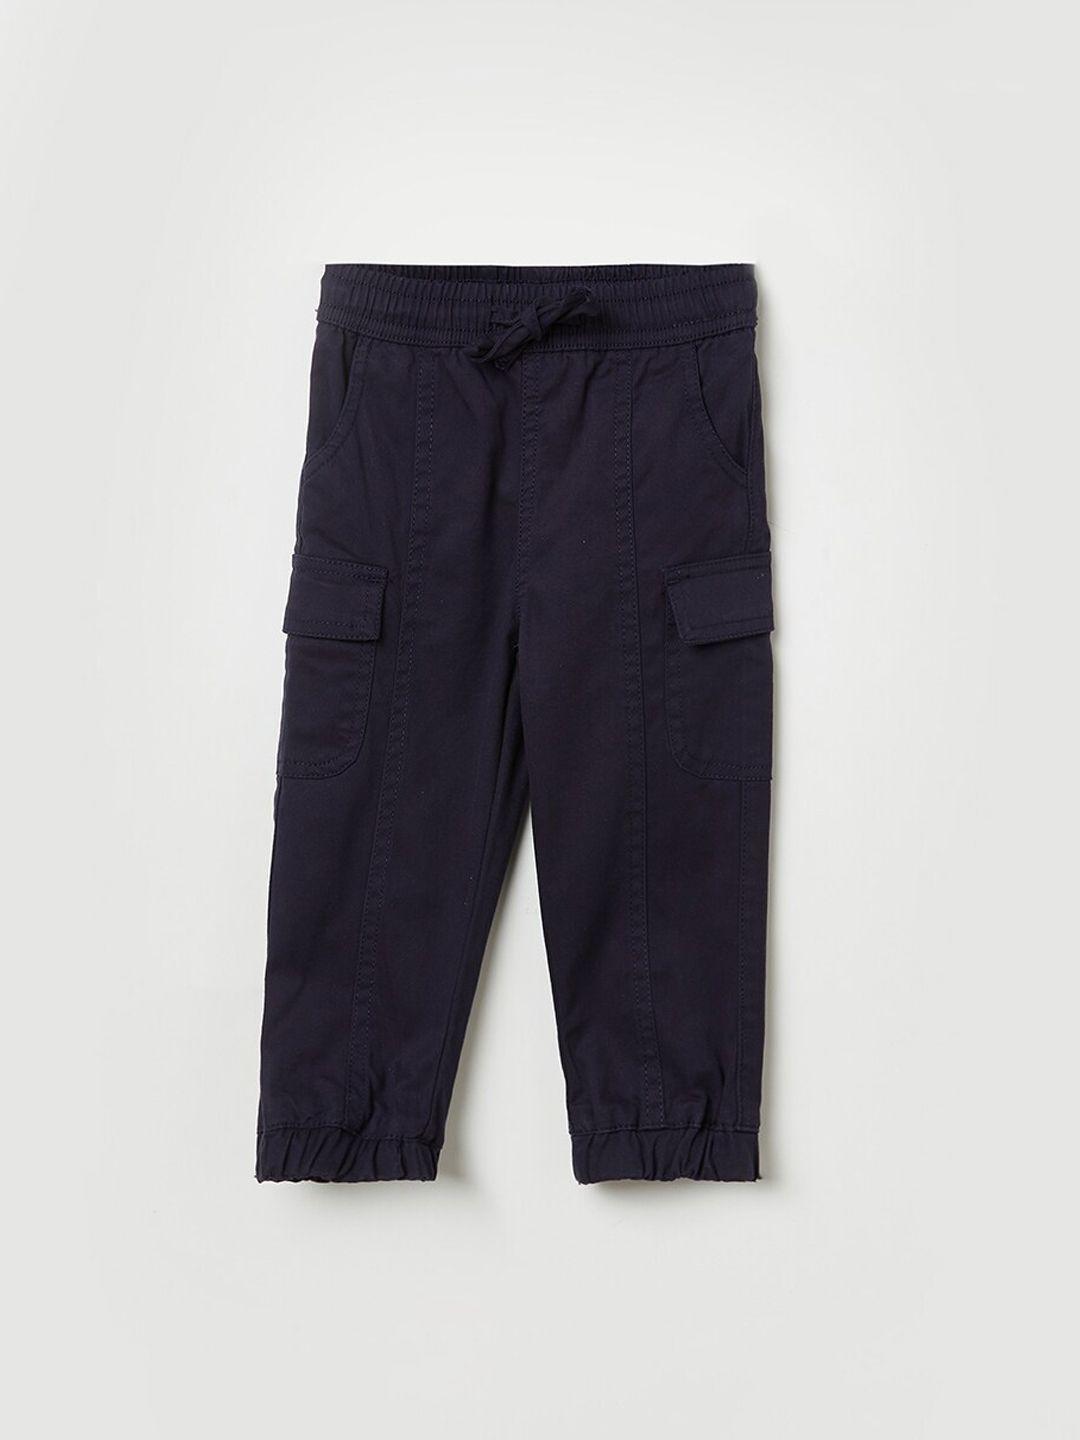 juniors by lifestyle boys navy blue cotton cargos trousers